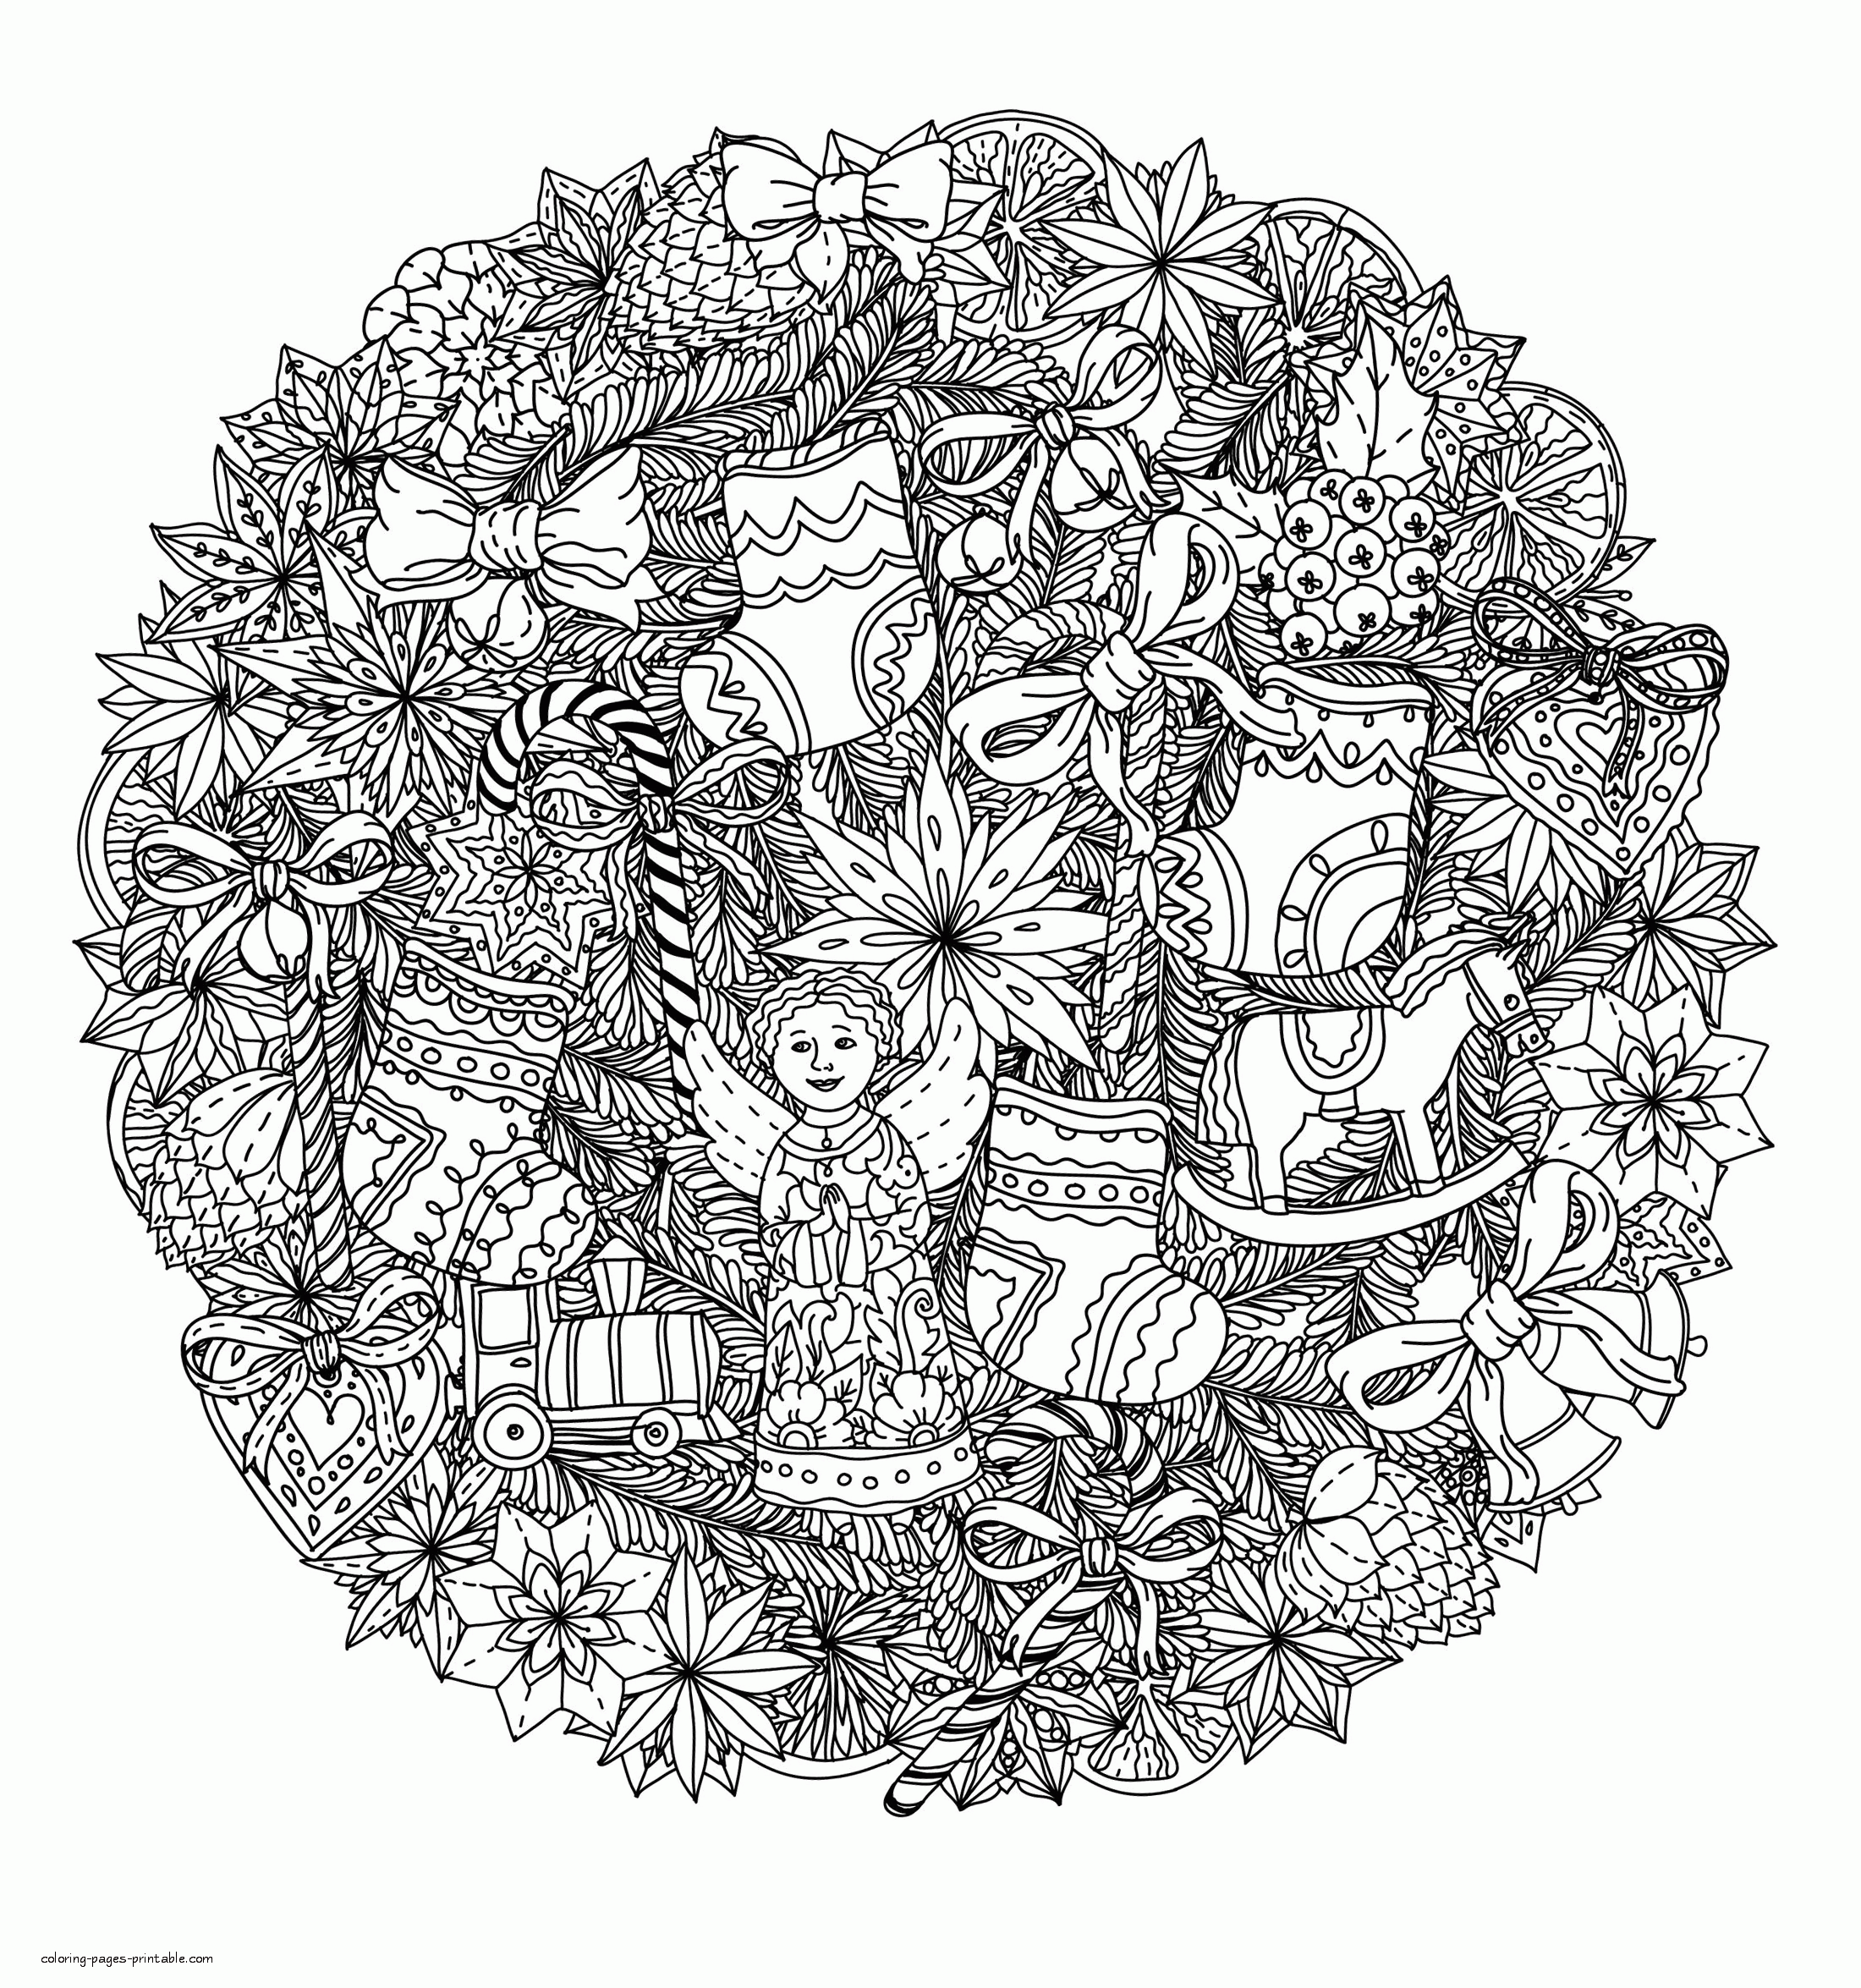 Big Detailed Free Coloring Page For Adults Christmas || COLORING-PAGES